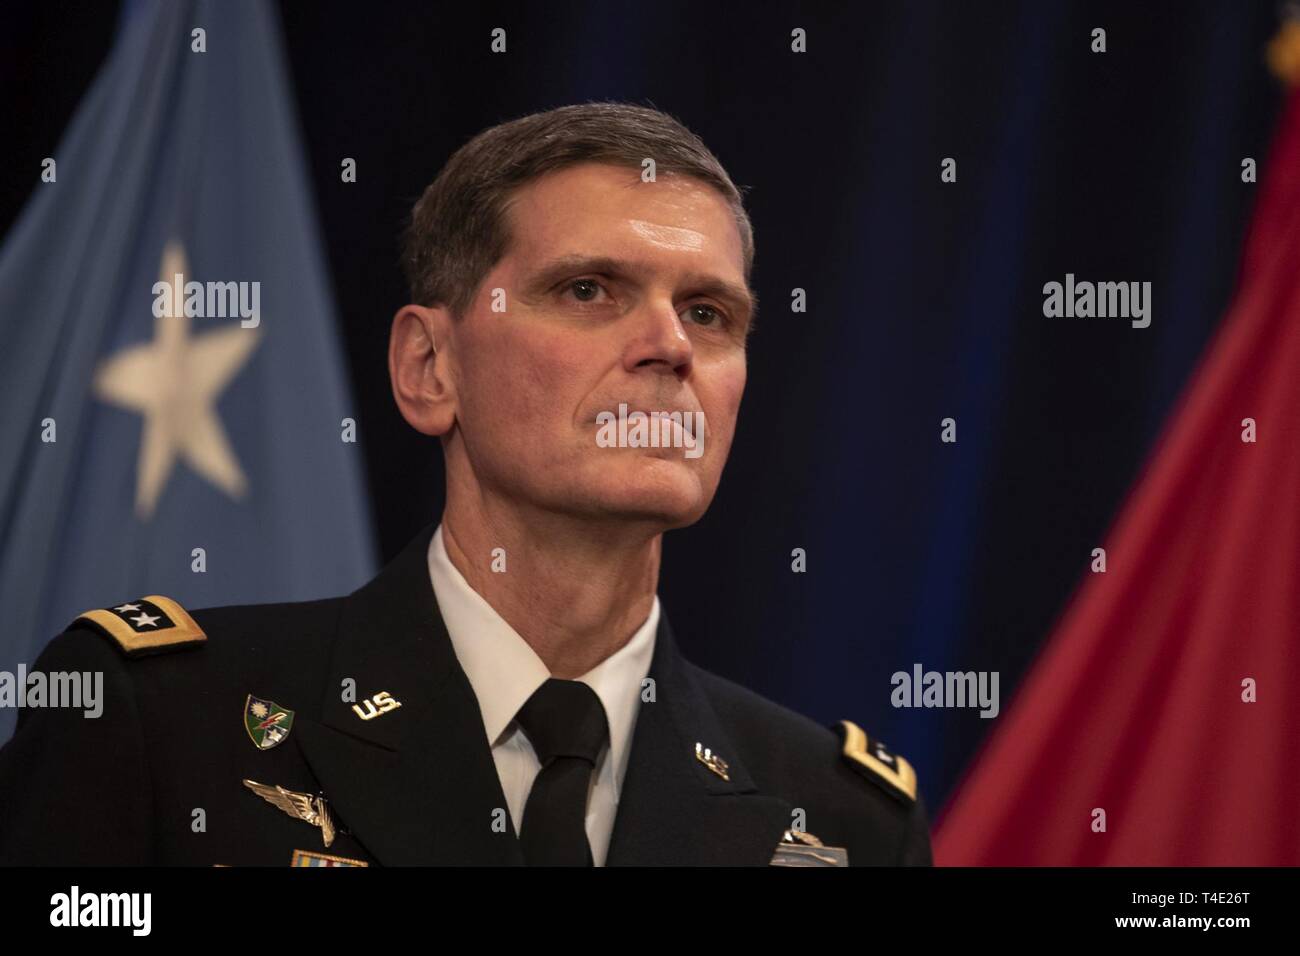 The outgoing commander of U.S. Central Command, U.S. Army Gen. Joseph L. Votel, is seen at the Centcom change of command, where U.S. Marine Corps Gen. Kenneth F. McKenzie Jr. became the new Centcom commander, Tampa, Florida, March 28, 2019. Stock Photo